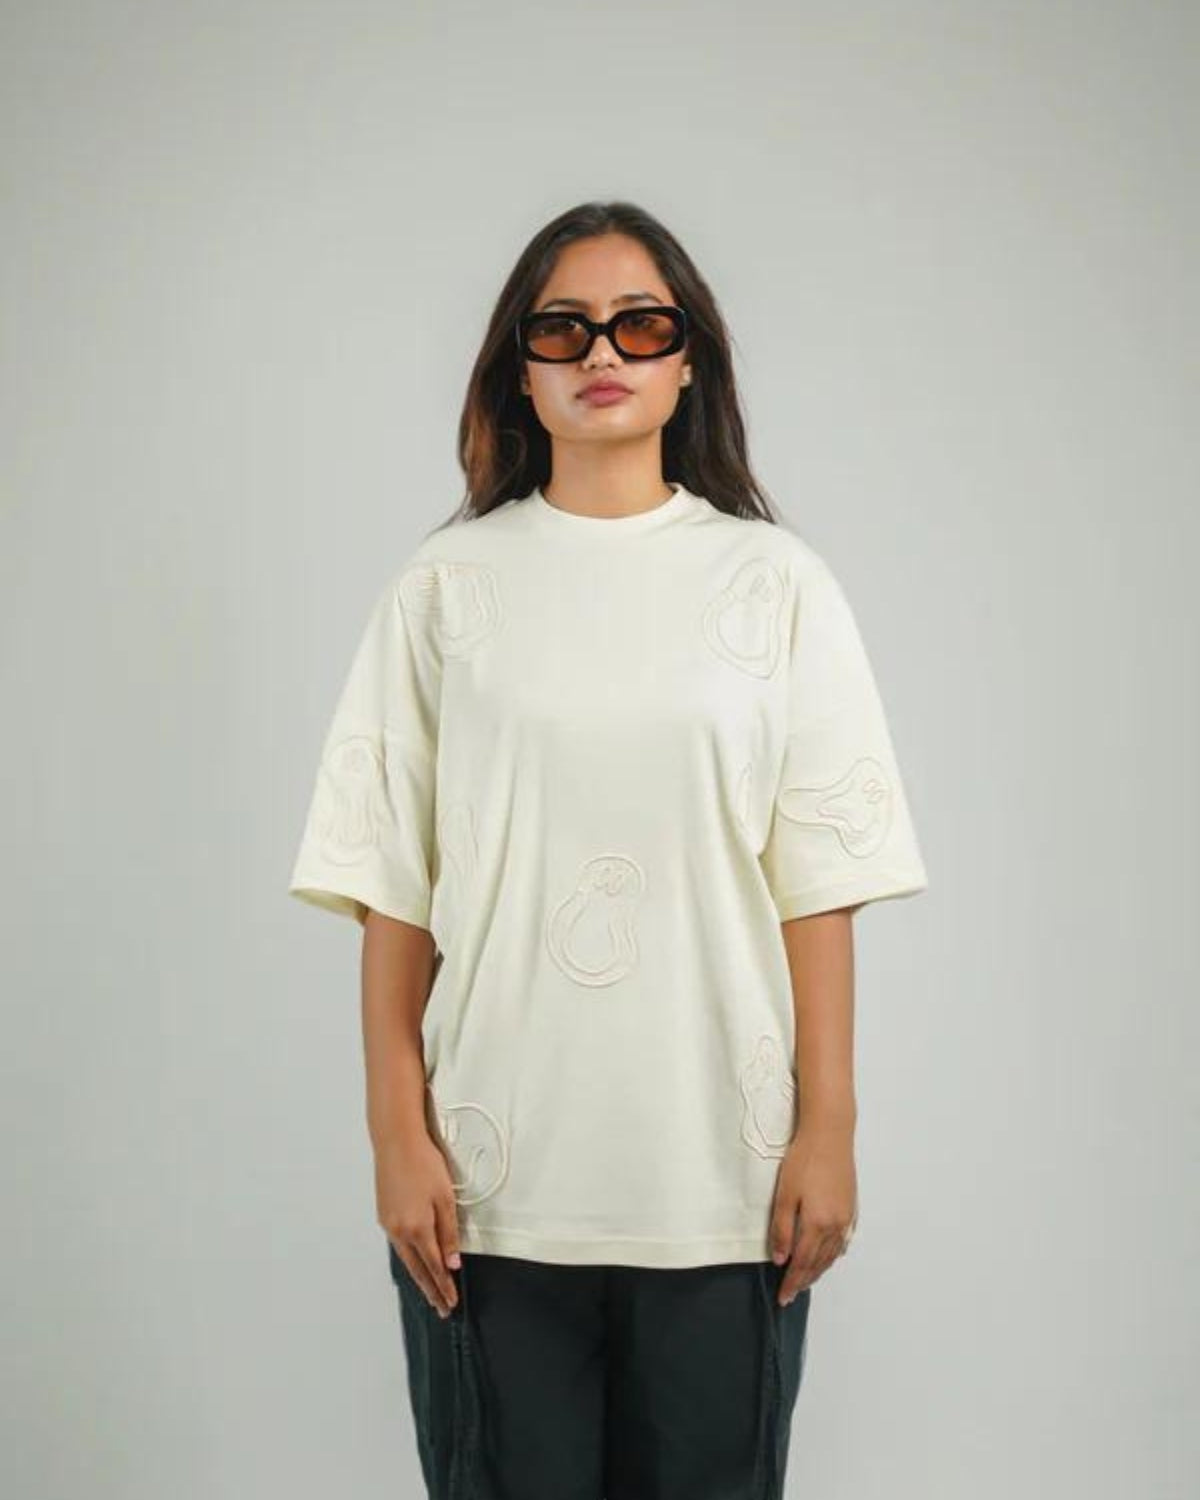 Cream Smiley Embroidered Tee